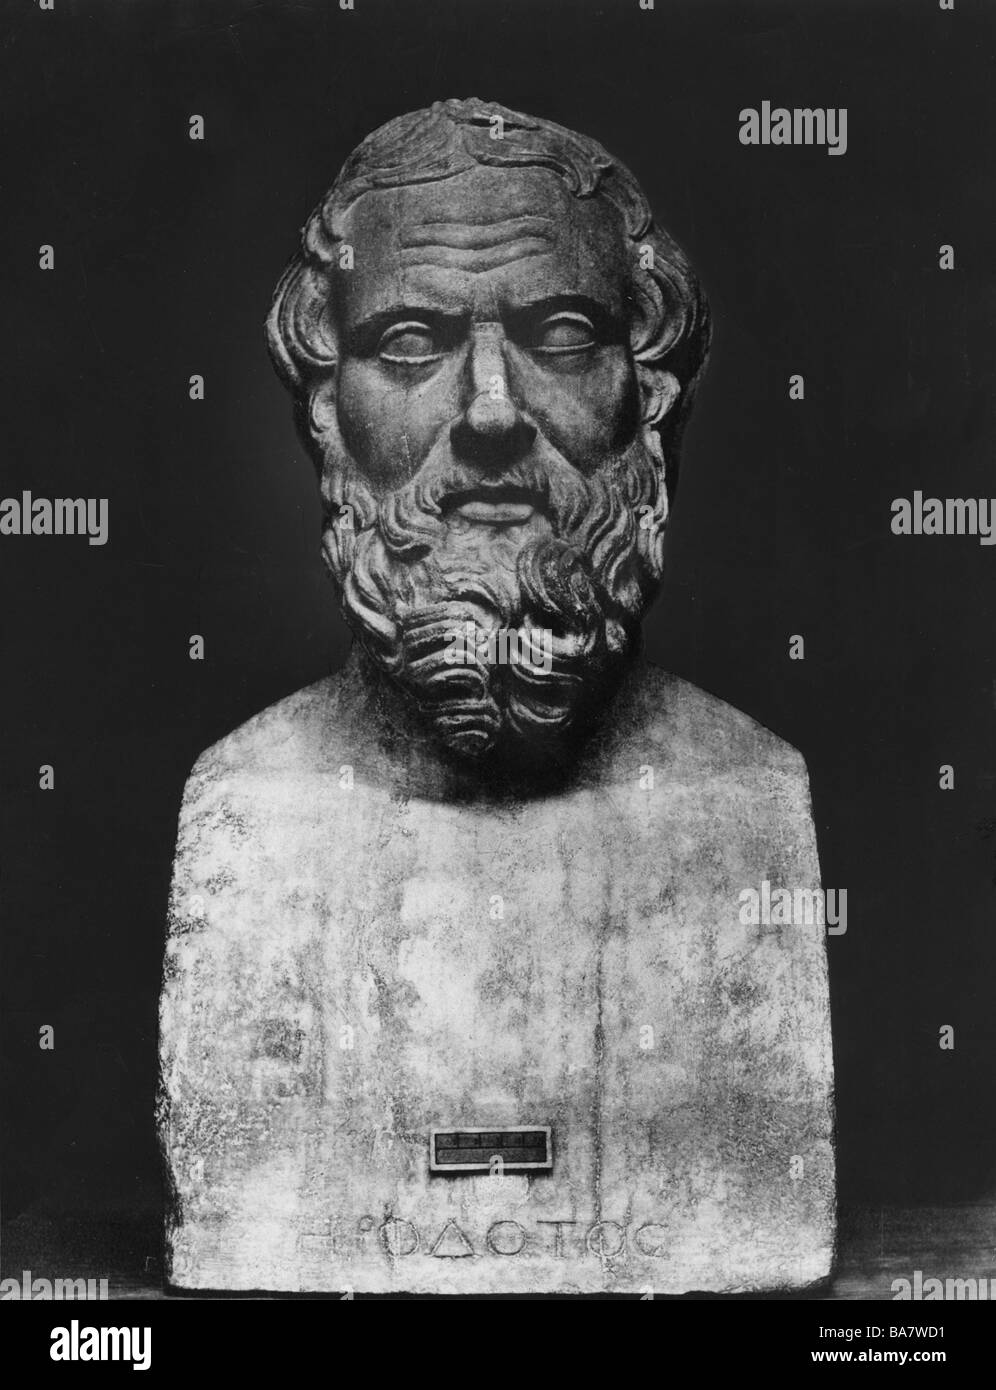 Herodotus, 484 BC - 425 BC, Greek scientist (historian), portrait, Roman copy of bust from 2nd half of 4th century BC, National Museum Naples, Stock Photo